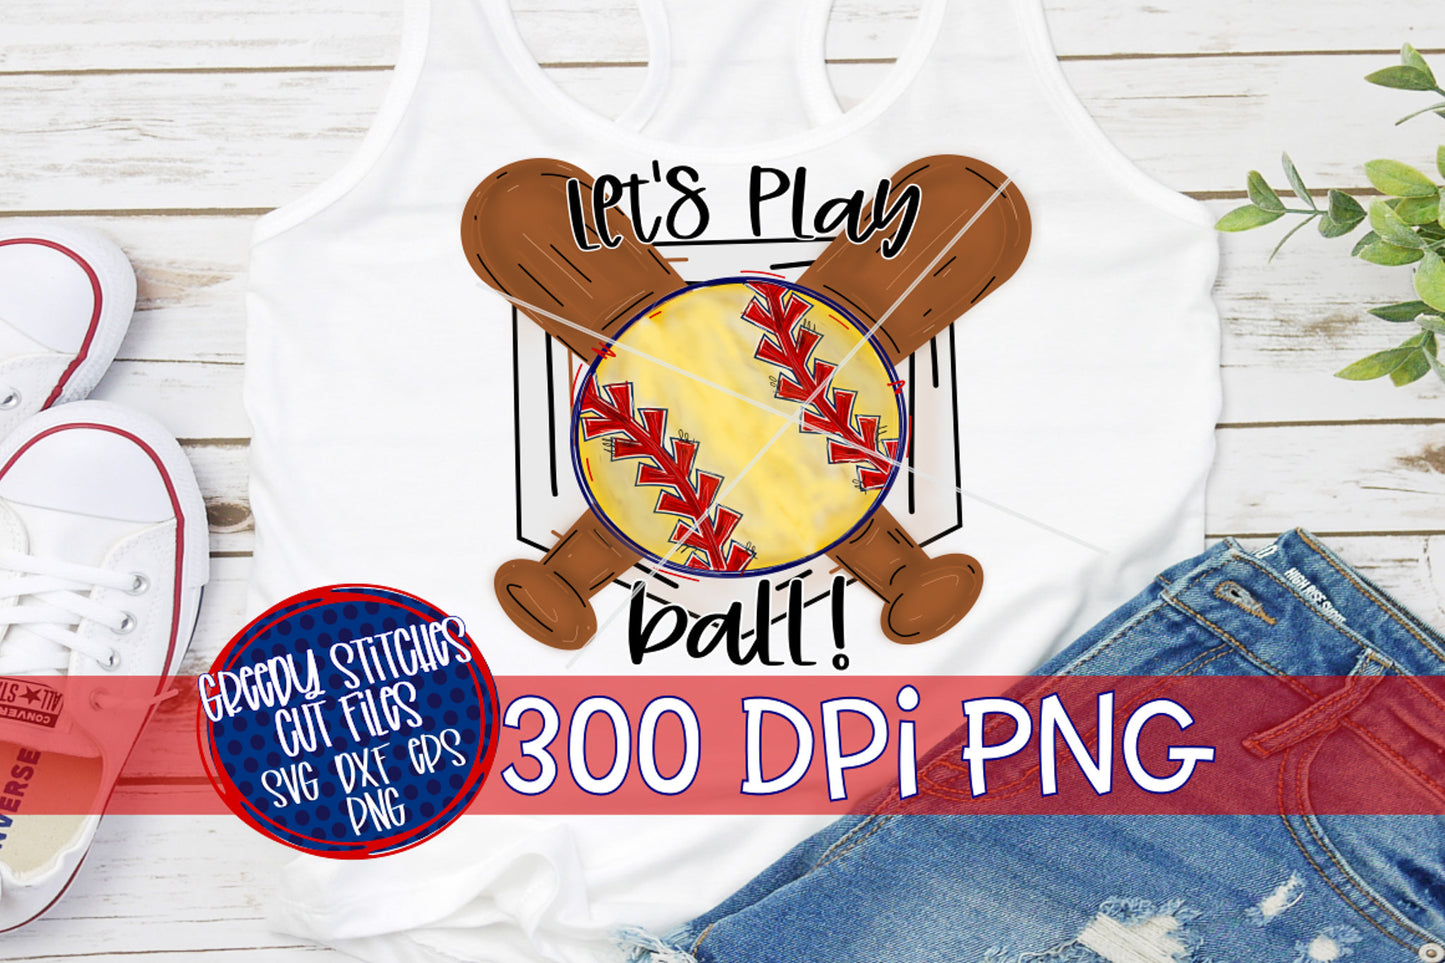 Let's Play Ball! Softball PNG Sublimation